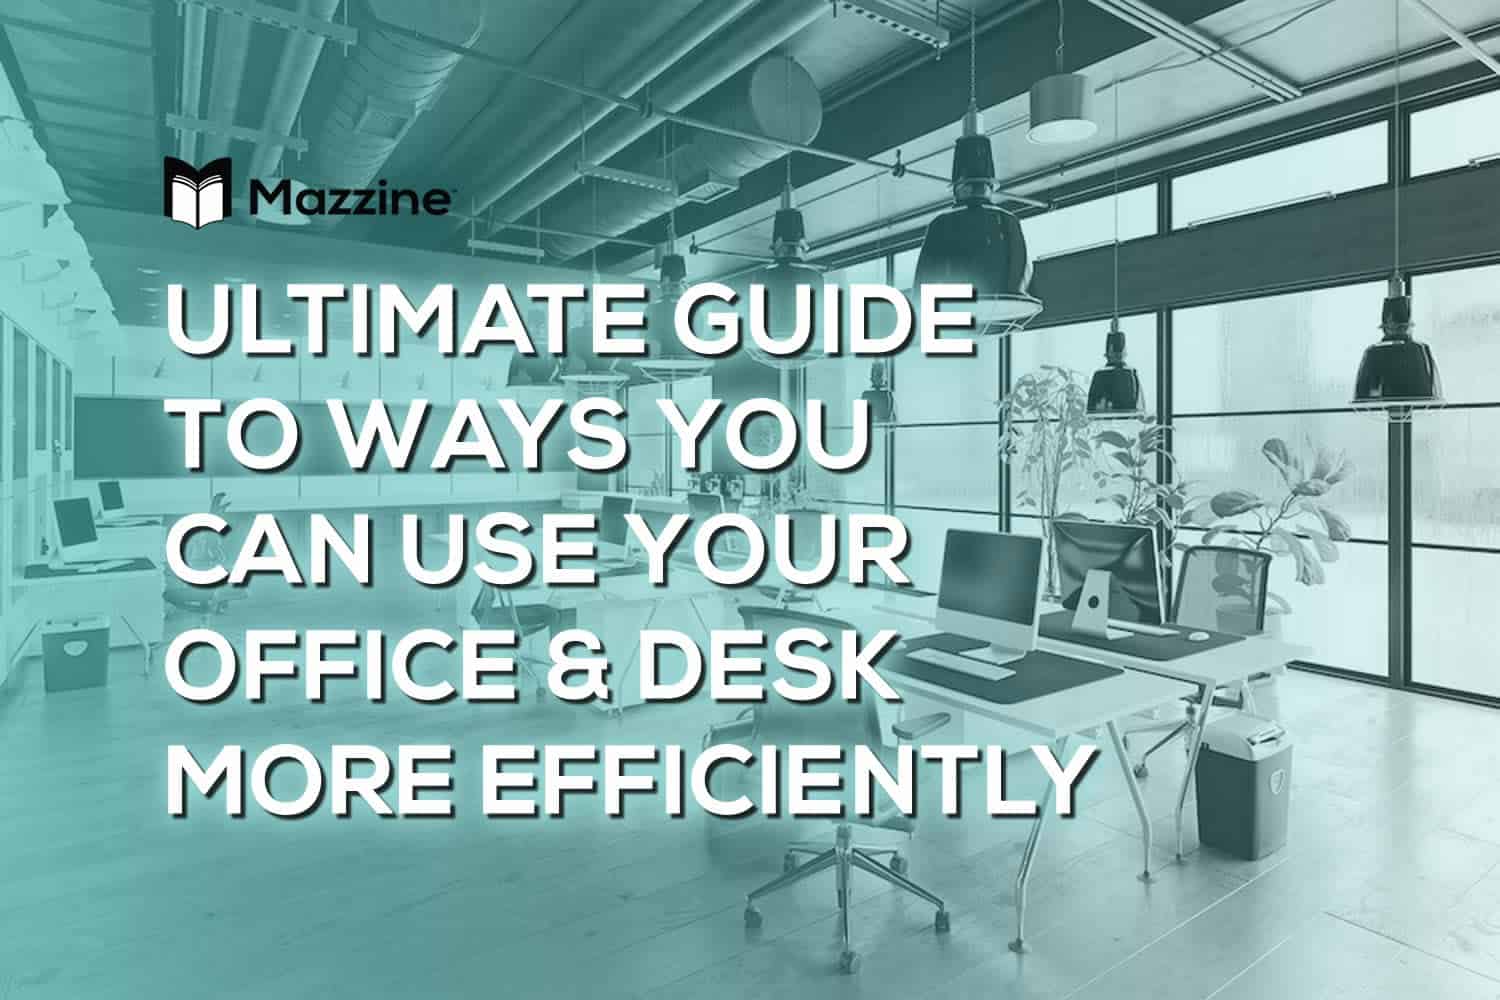 The Ultimate Guide To Ways You Can Use Your Office & Desk More Efficiently